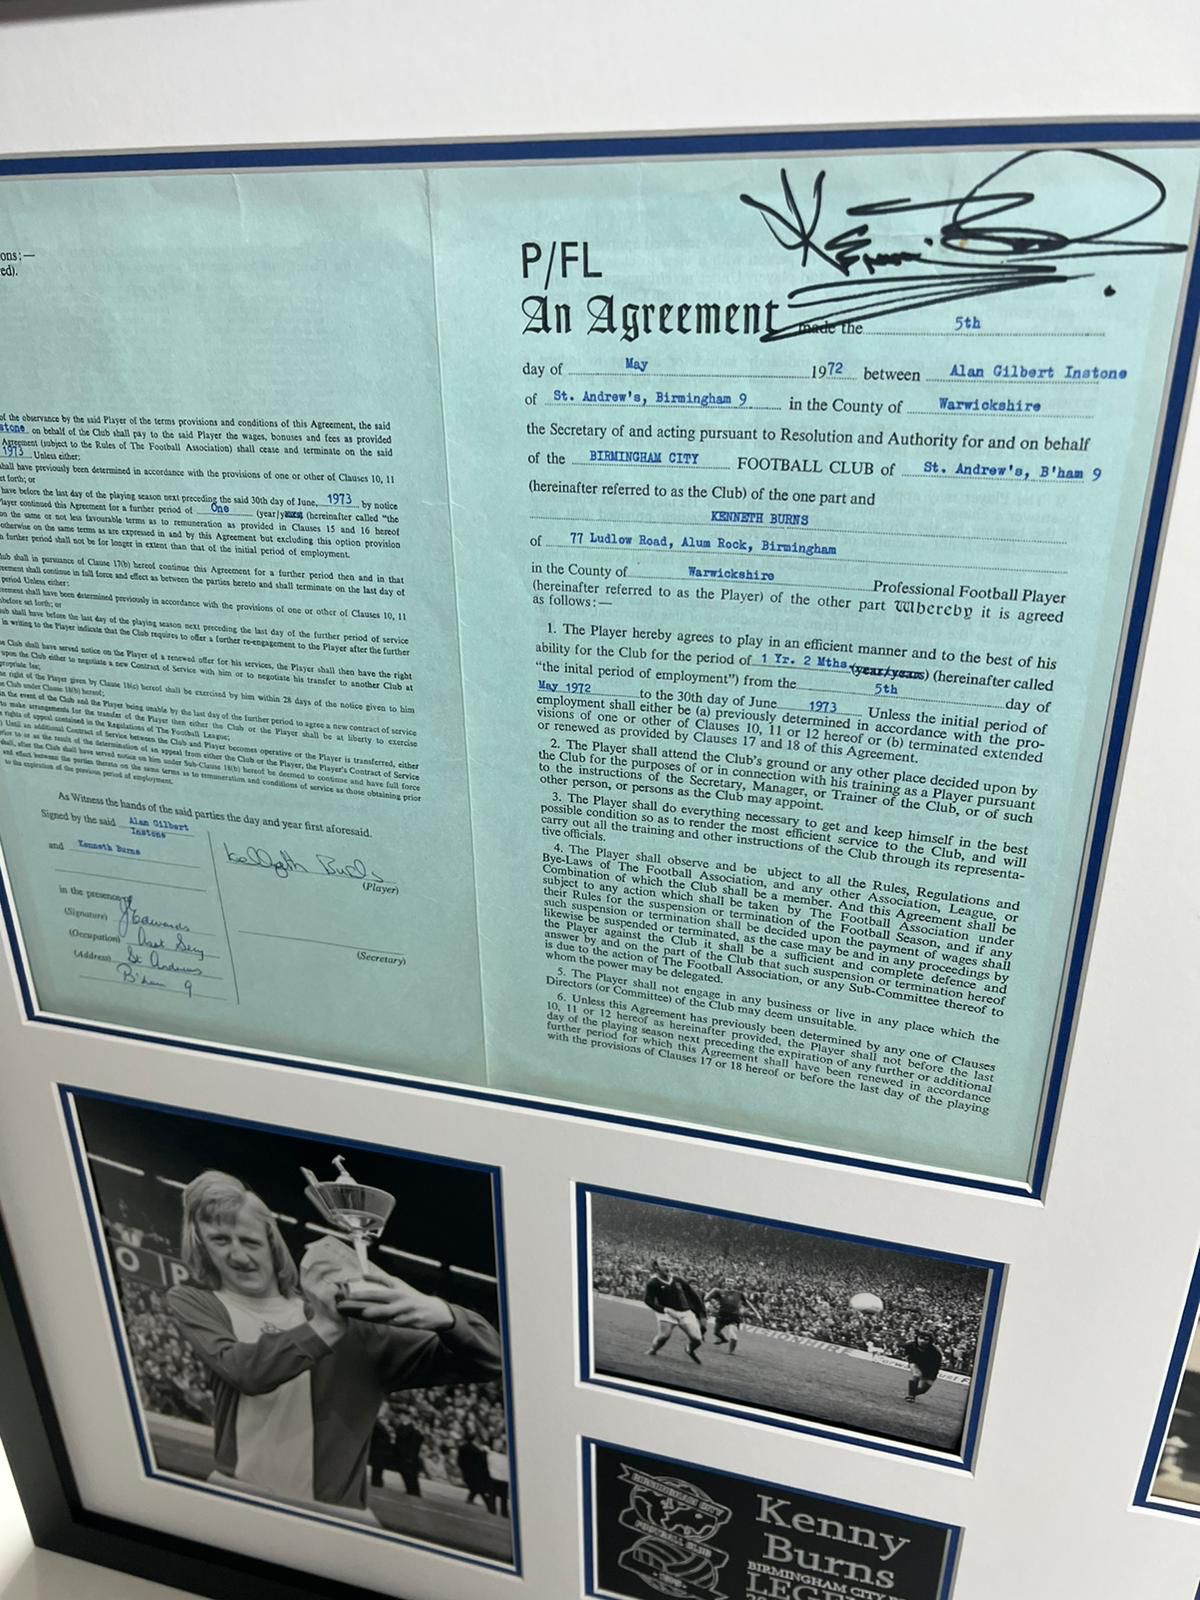 Birmingham City Kenny Burns Legend Signed Frame - Incredible! Double sided! With original contract and cheque.